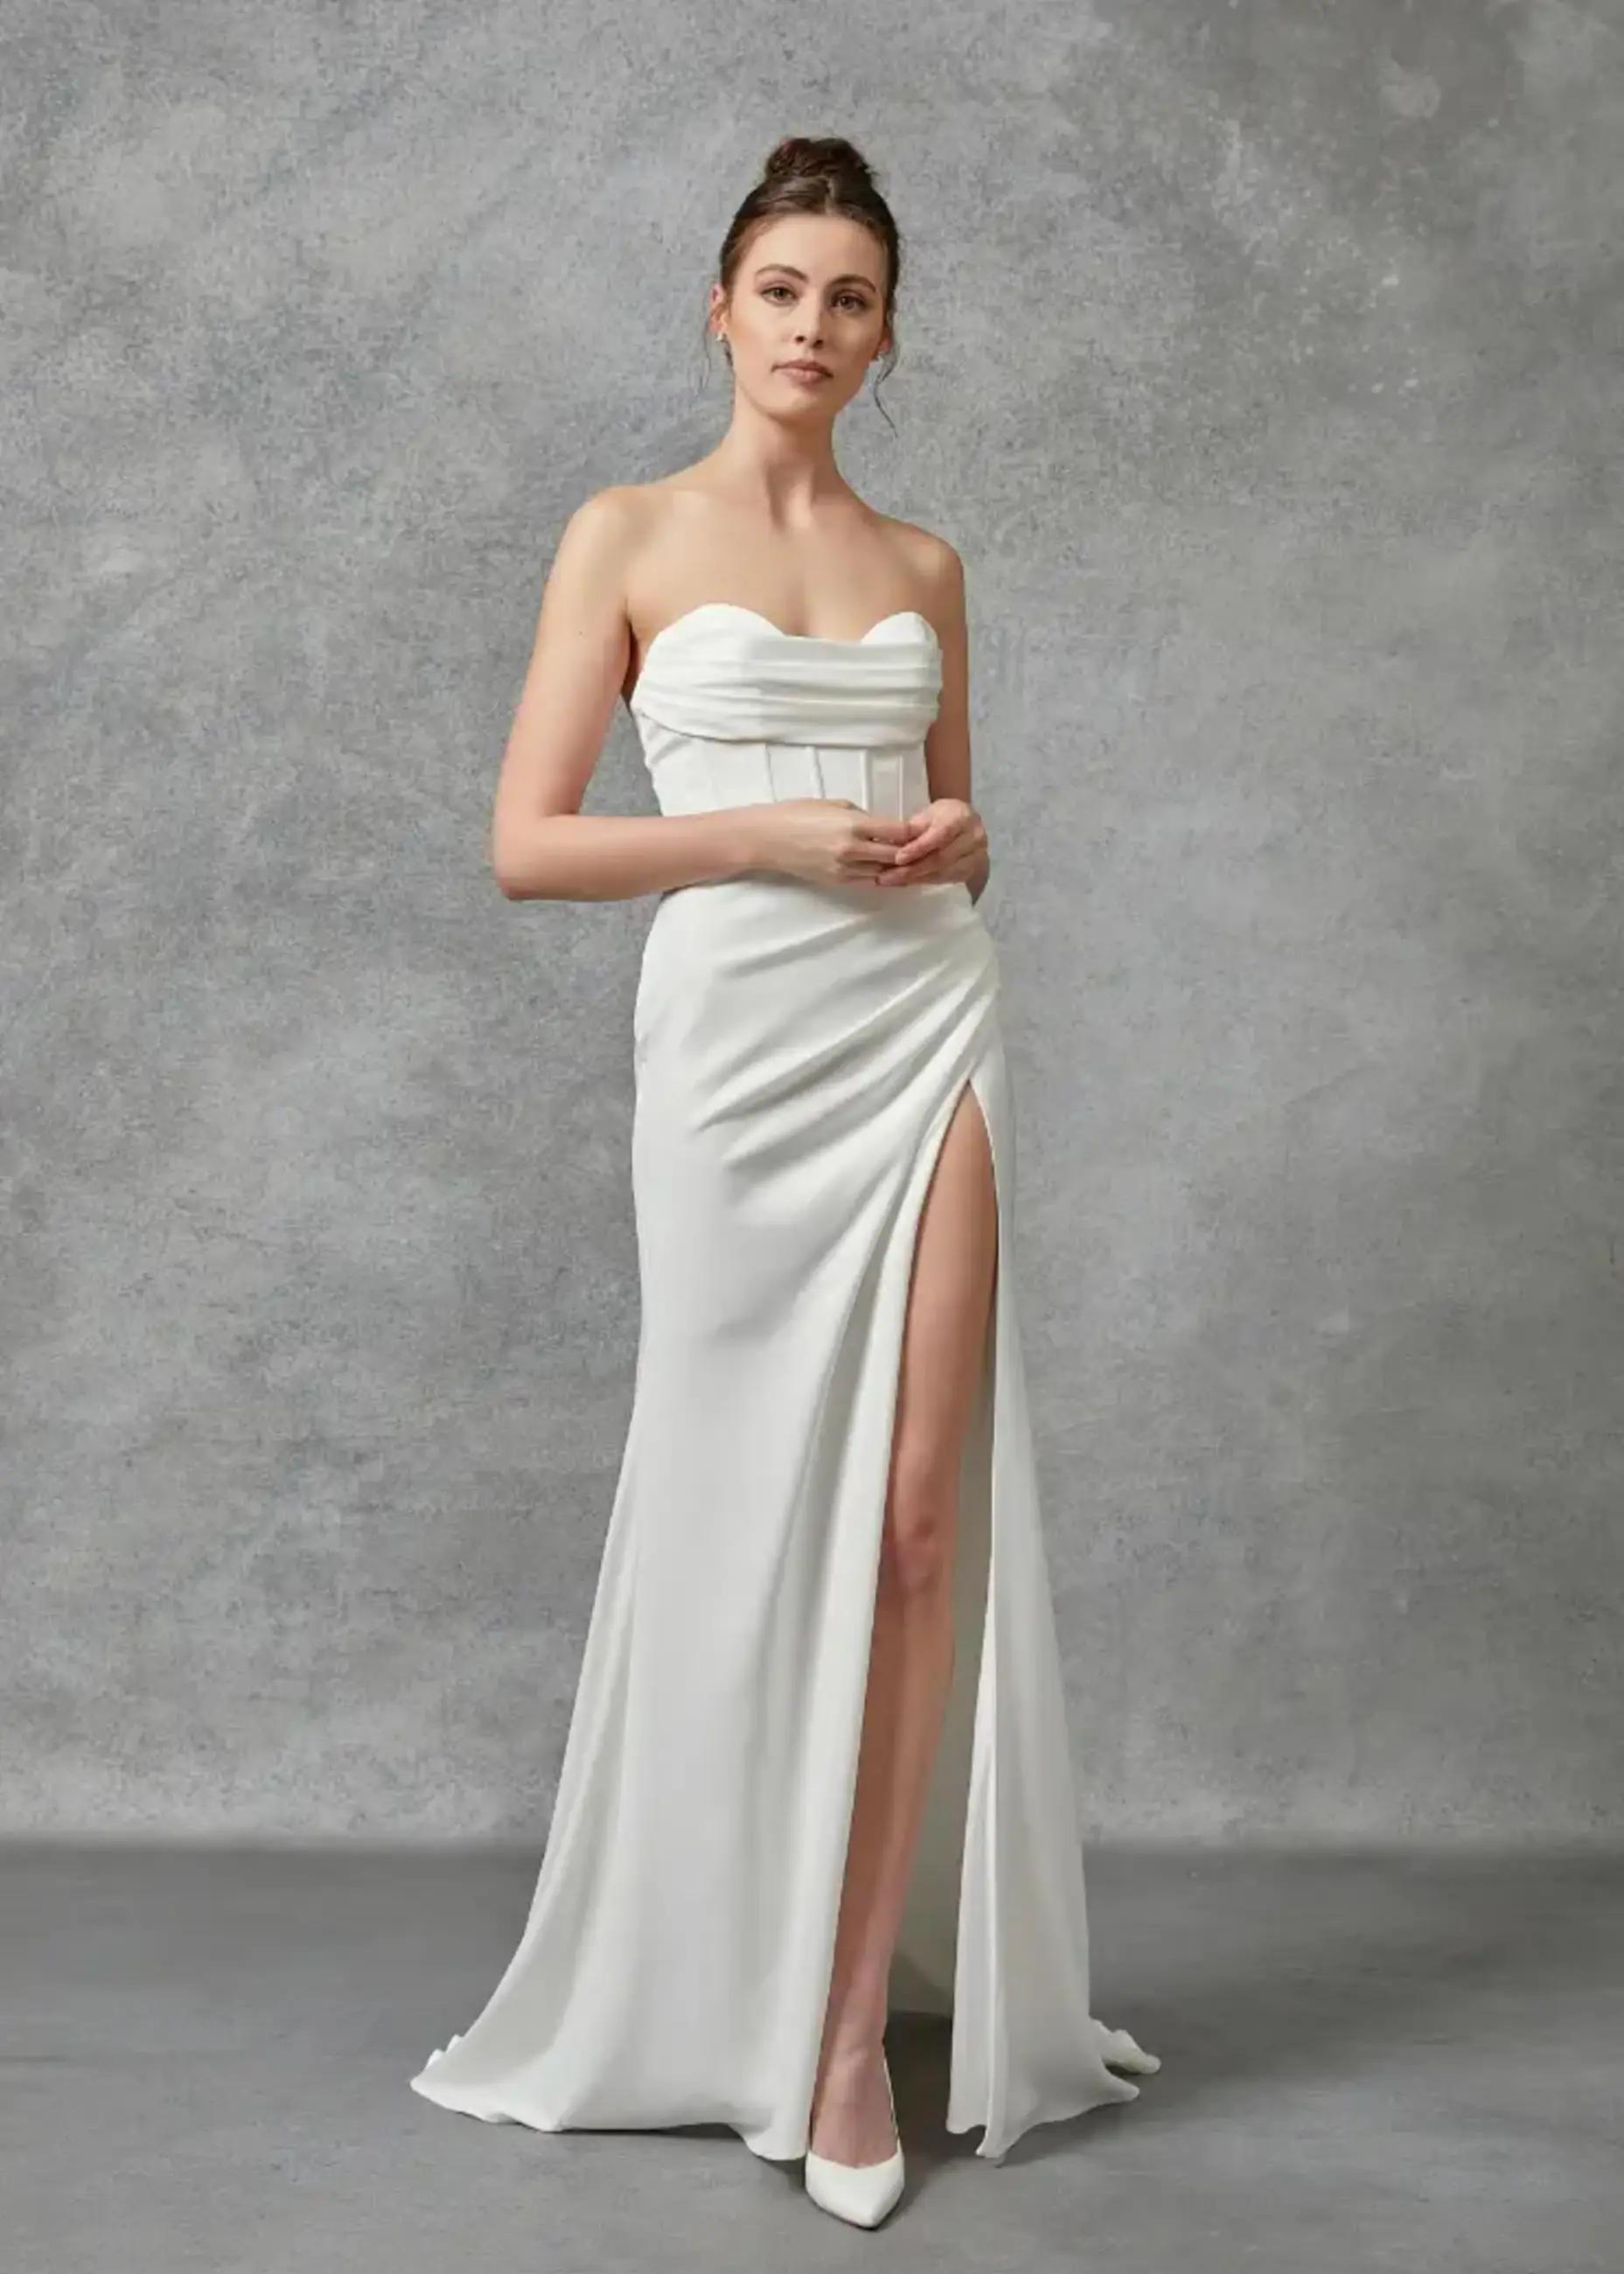 Discover the Perfect Minimalistic Bridal Gowns at Seattle Bridal Rack Image